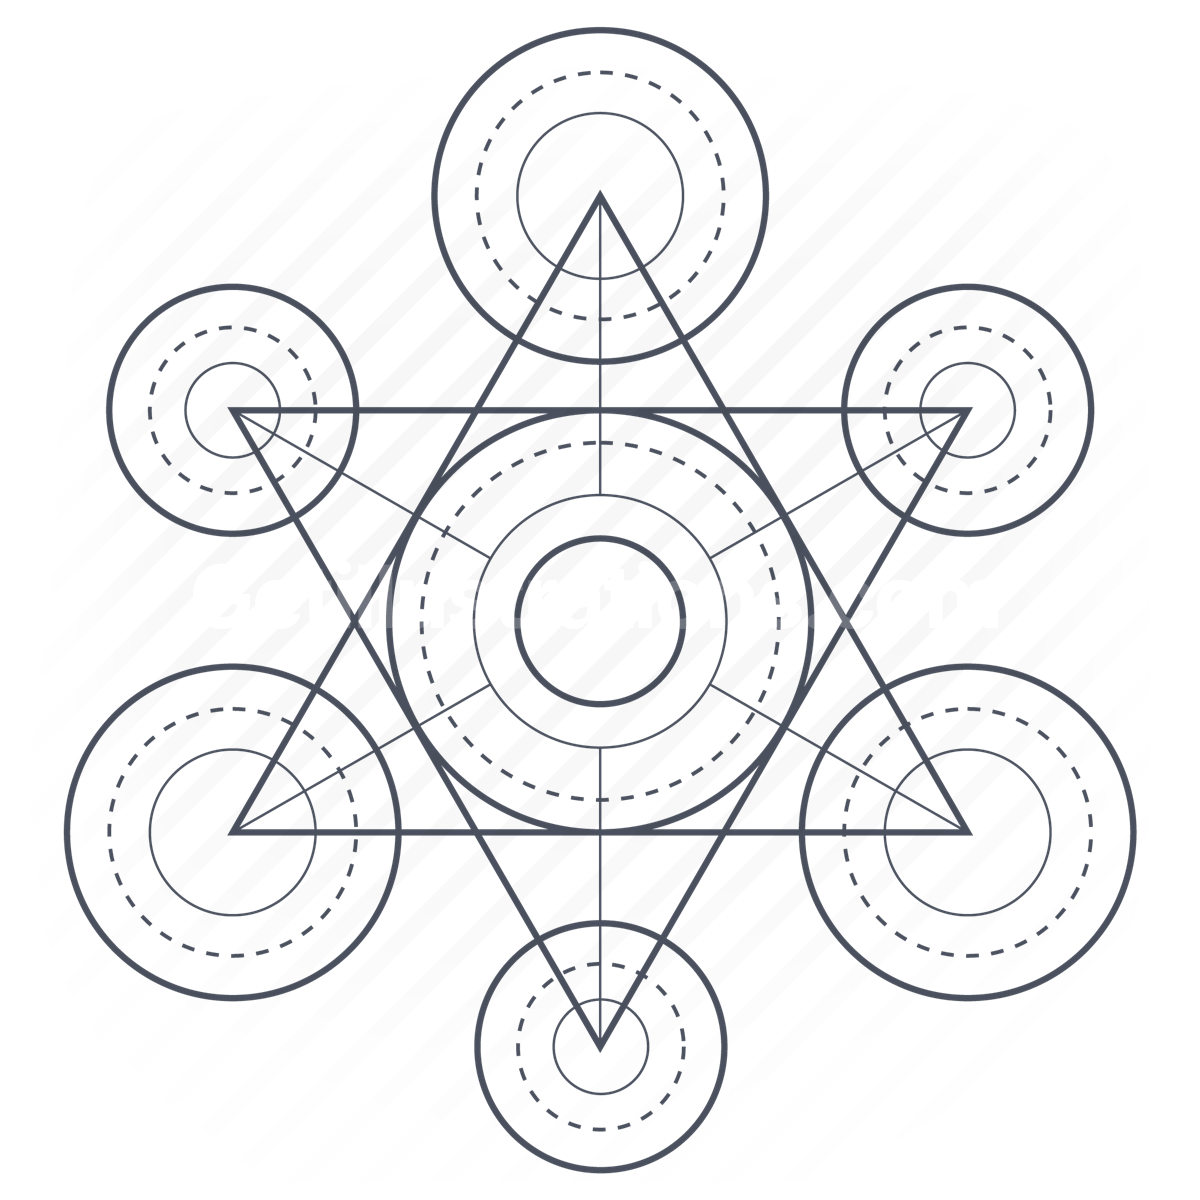 shape, shapes, element, sacred, geometry, circles, triangles, triangle